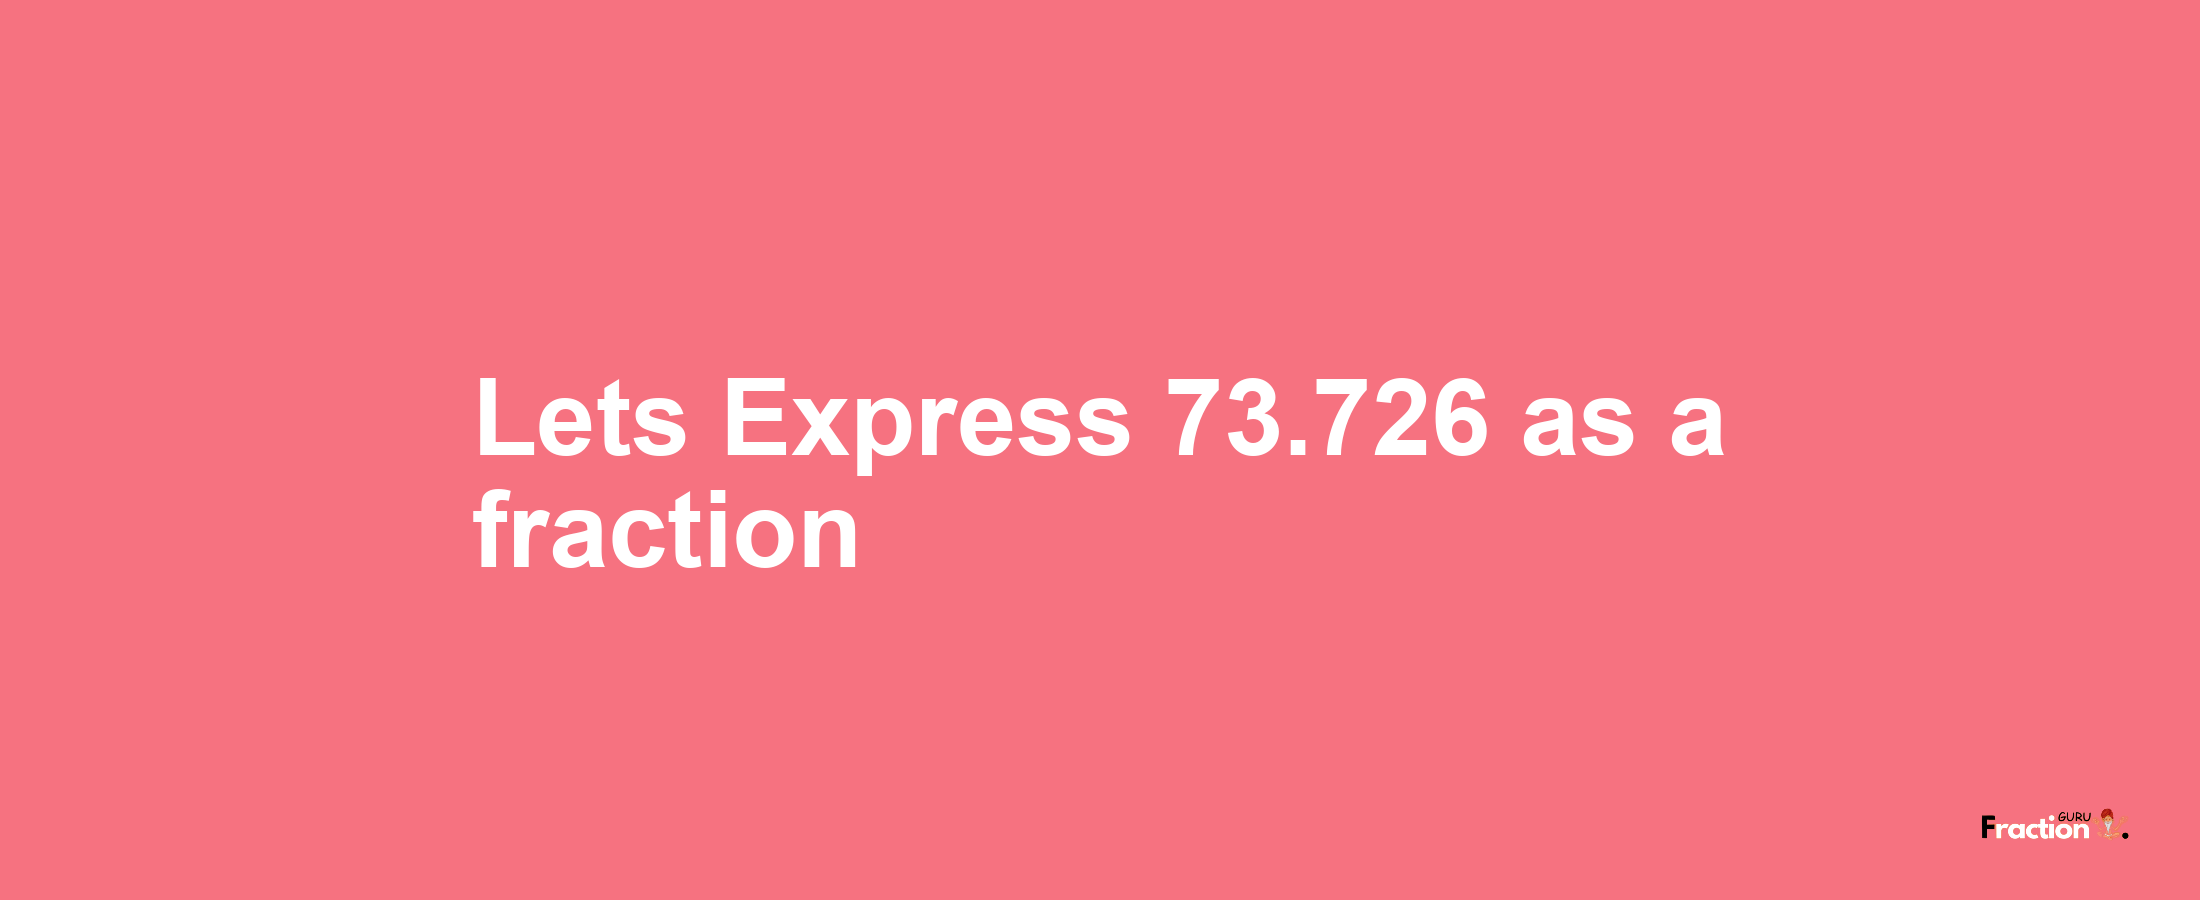 Lets Express 73.726 as afraction